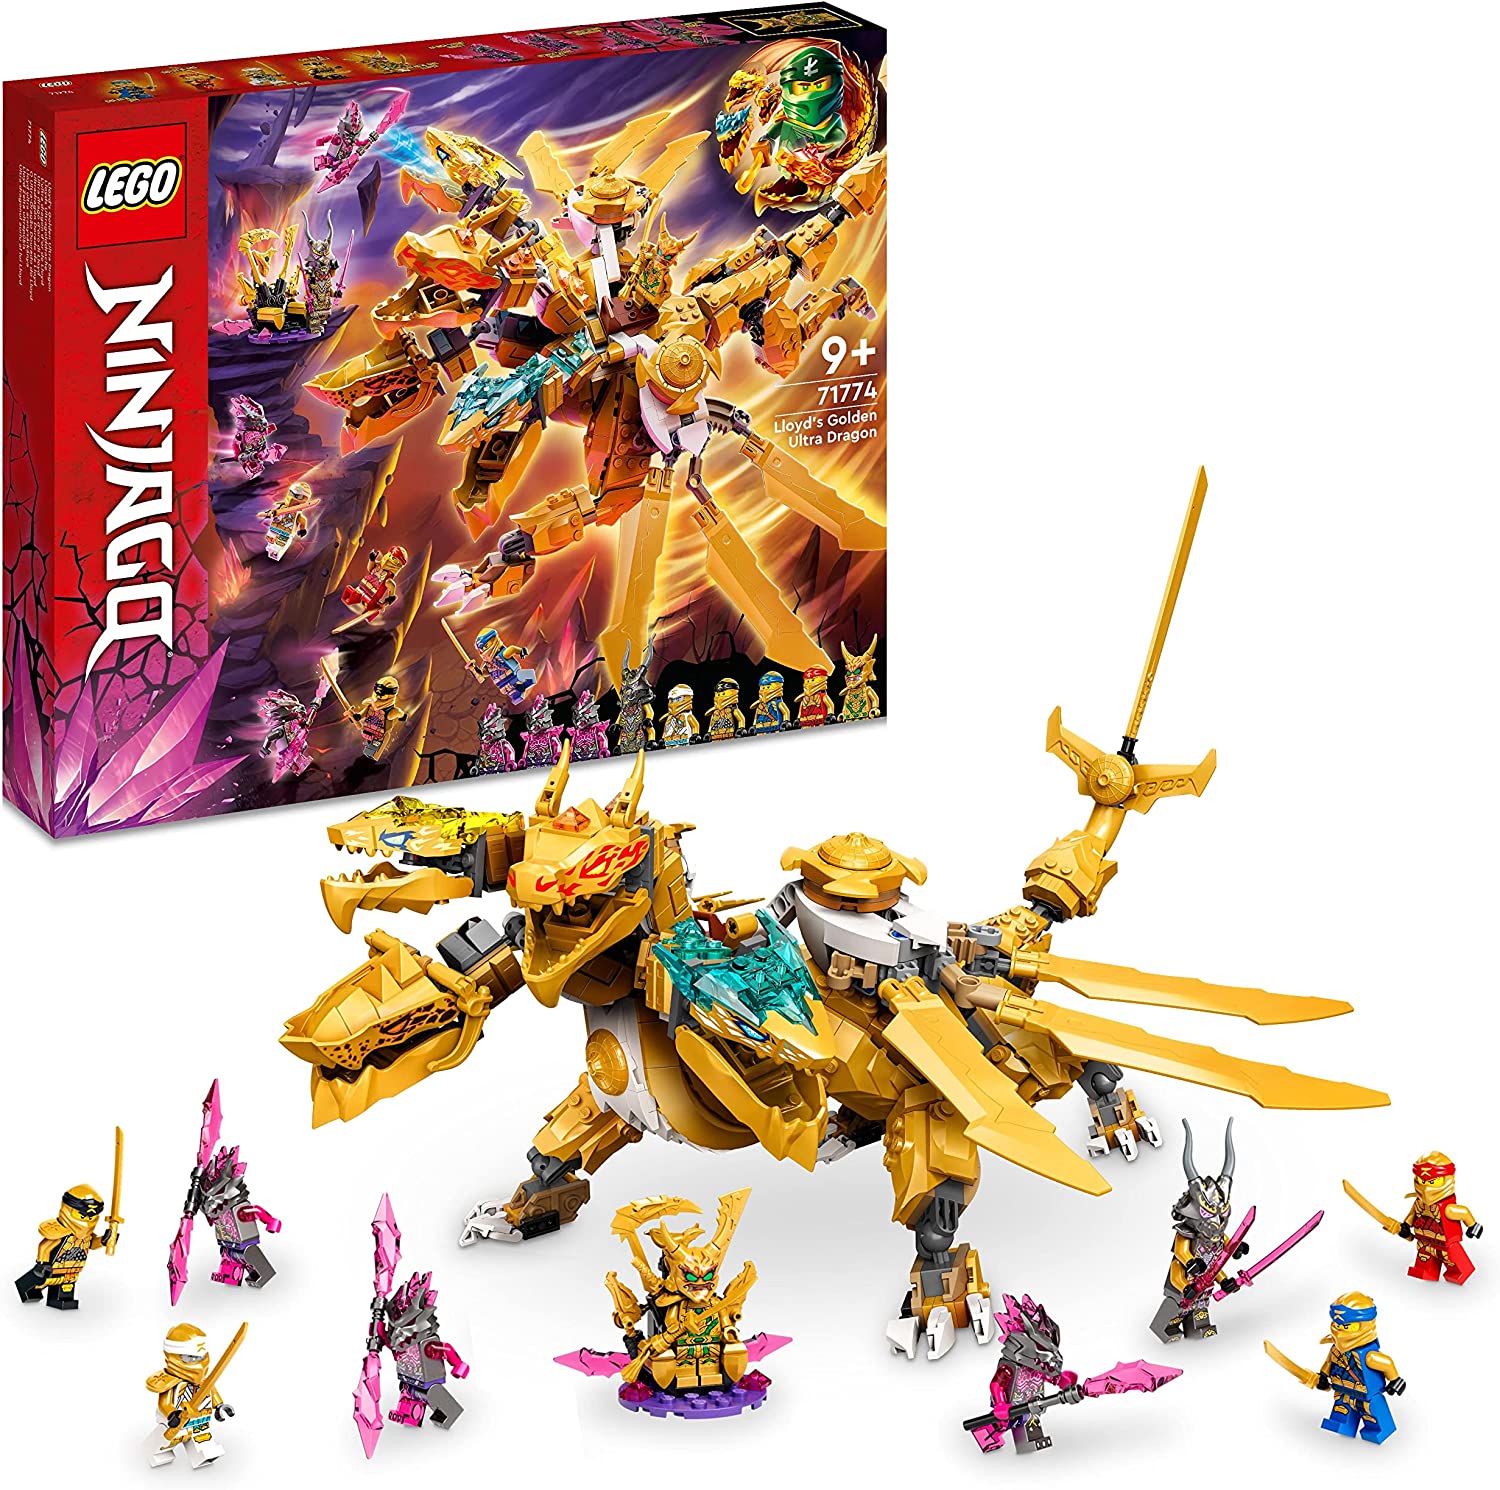 LEGO 71774 NINJAGO Lloyds Ultra Gold Dragon Set with Dragon Figure and 9 Mini Figures Including Lloyd, Kai and Zane, Toy for Children from 9 Years